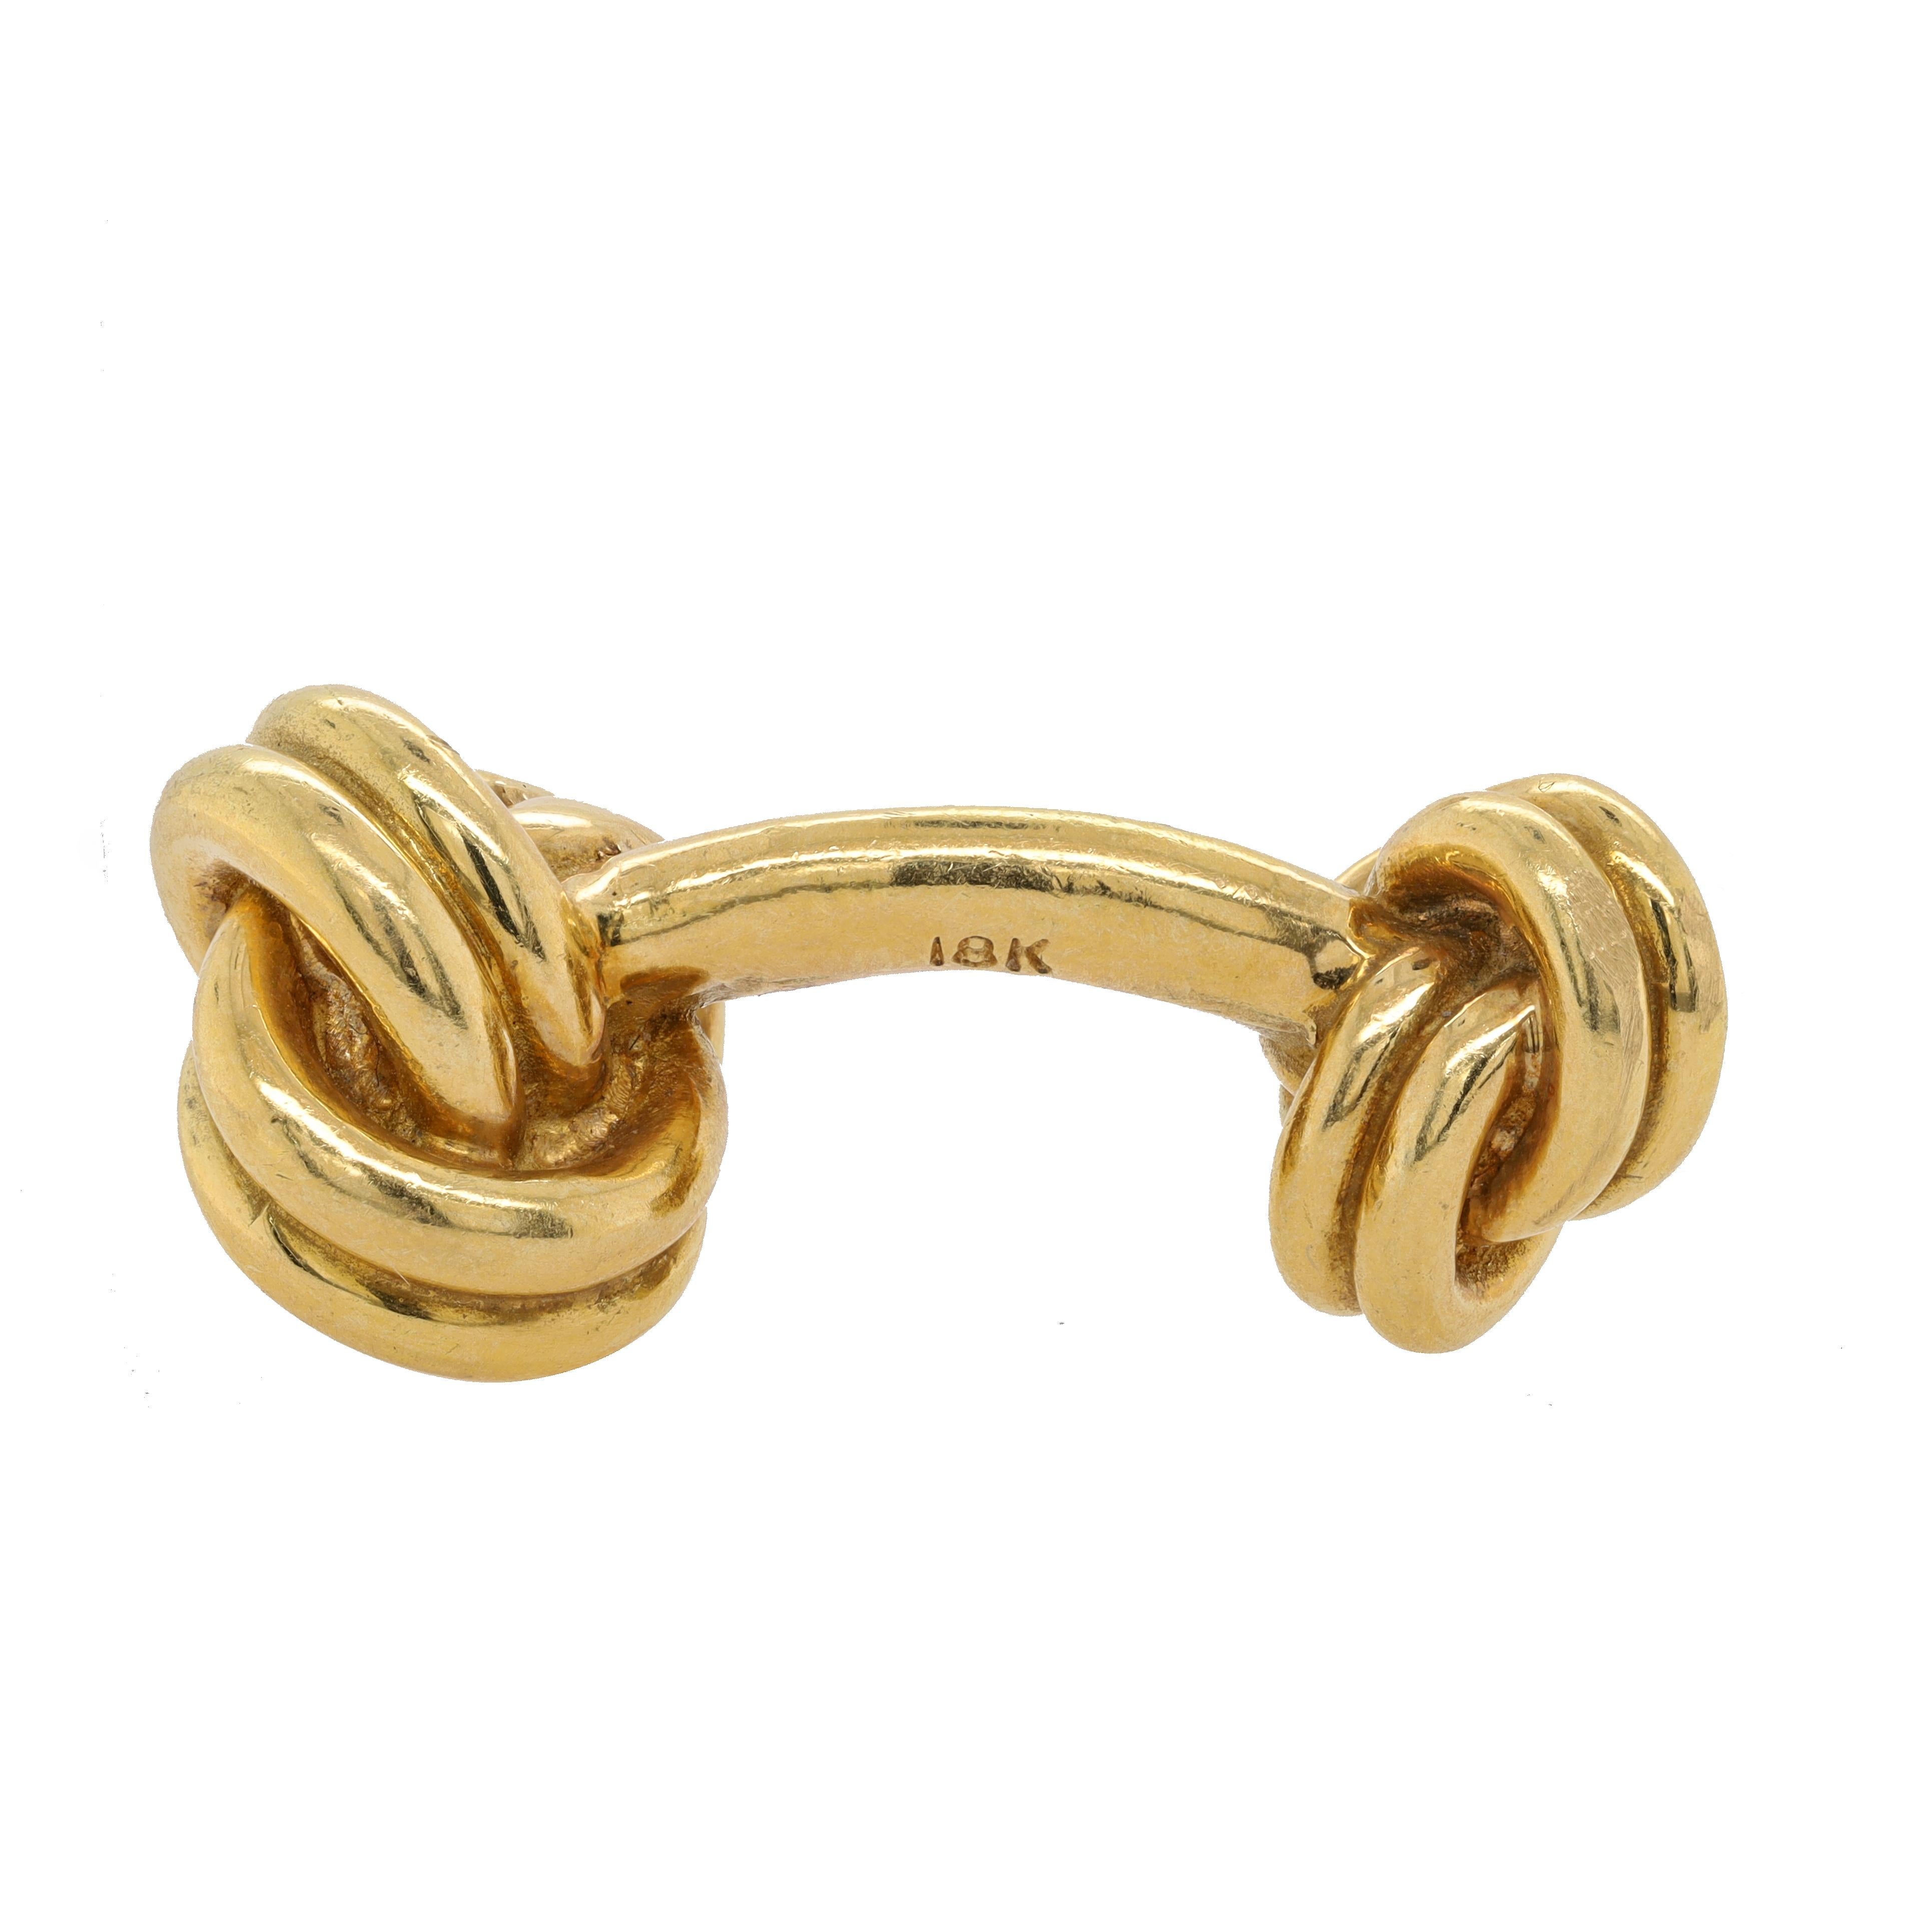 18 kt yellow gold 29.29 gram  Cartier cufflinks 
Diana M. is a leading supplier of top-quality fine jewelry for over 35 years.
Diana M is one-stop shop for all your jewelry shopping, carrying line of diamond rings, earrings, bracelets, necklaces,